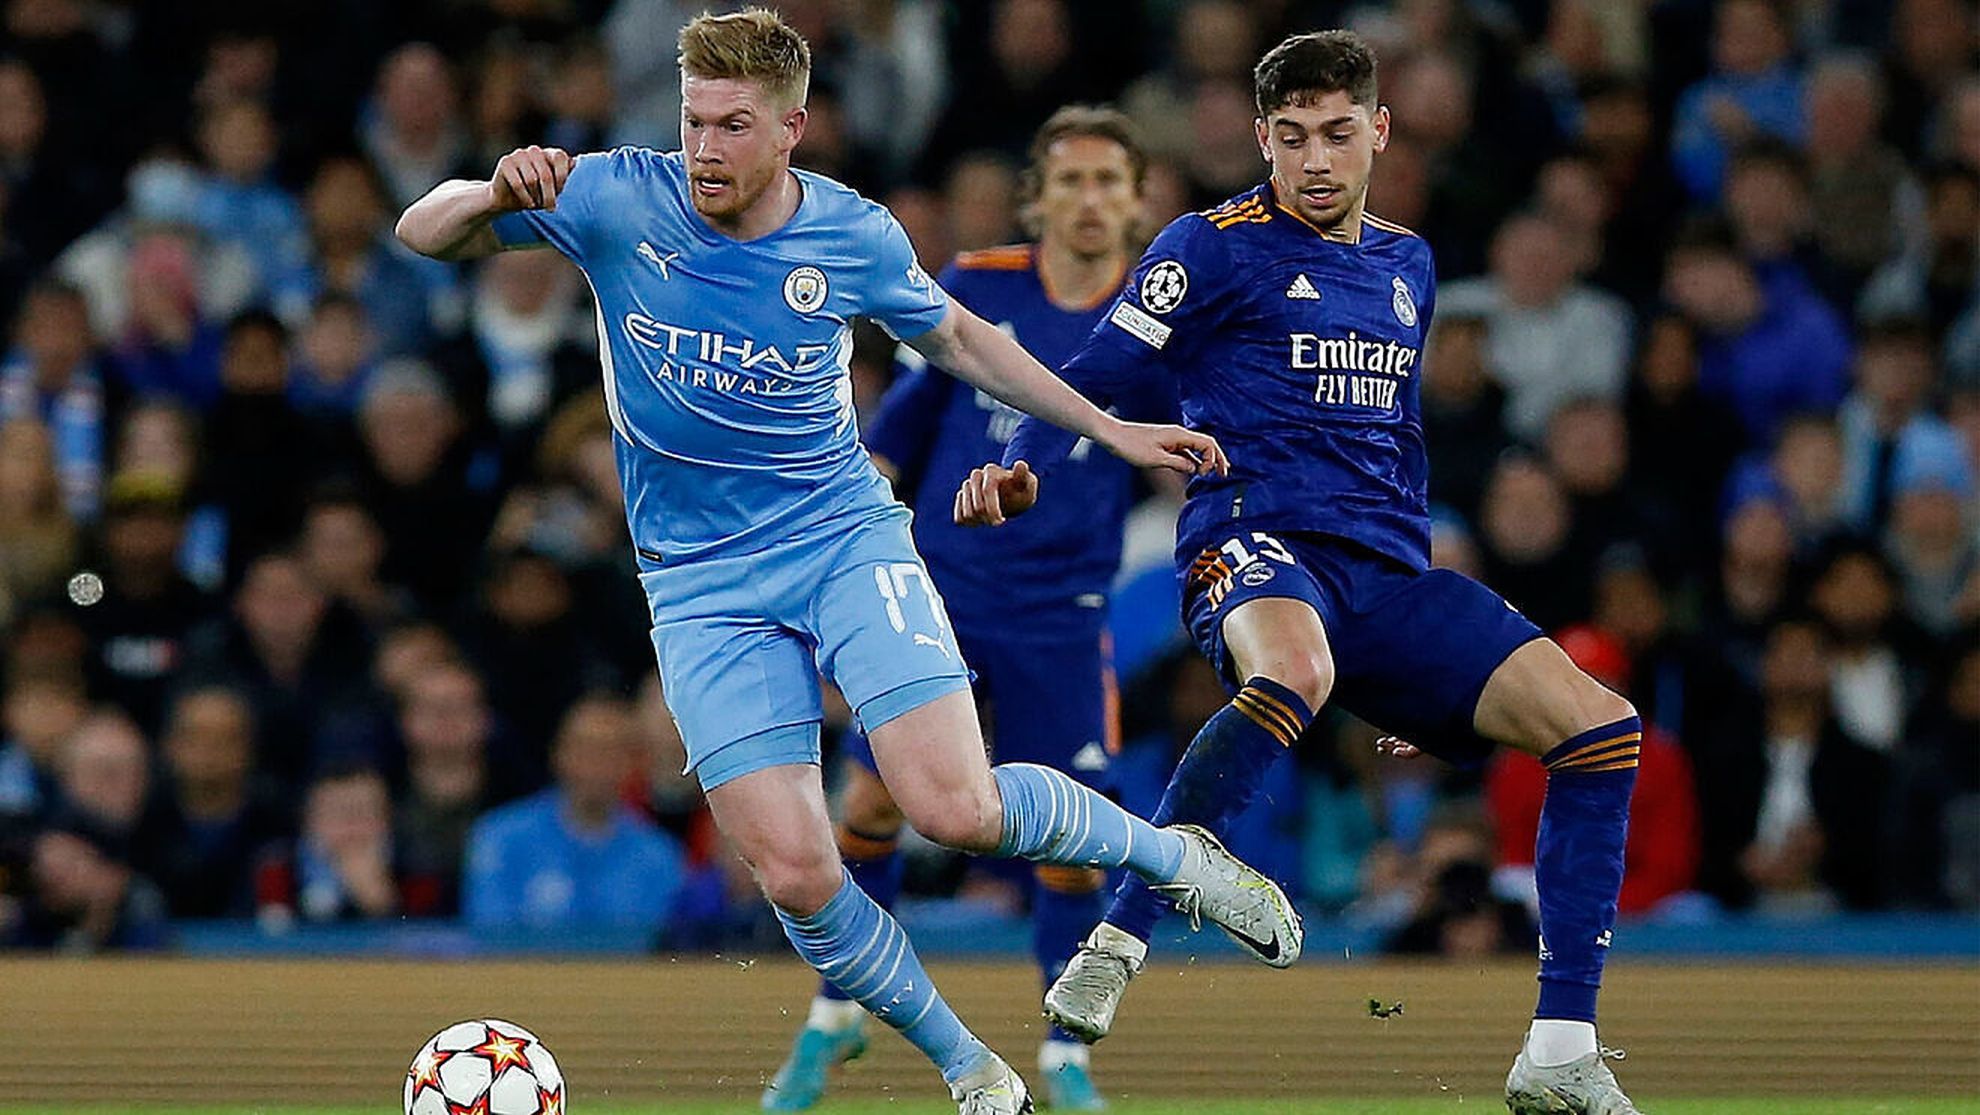 Mose tuberkulose Bliv ved Real Madrid 3-1 Manchester City (6-5 agg.): Goals and highlights -  Champions League 21/22